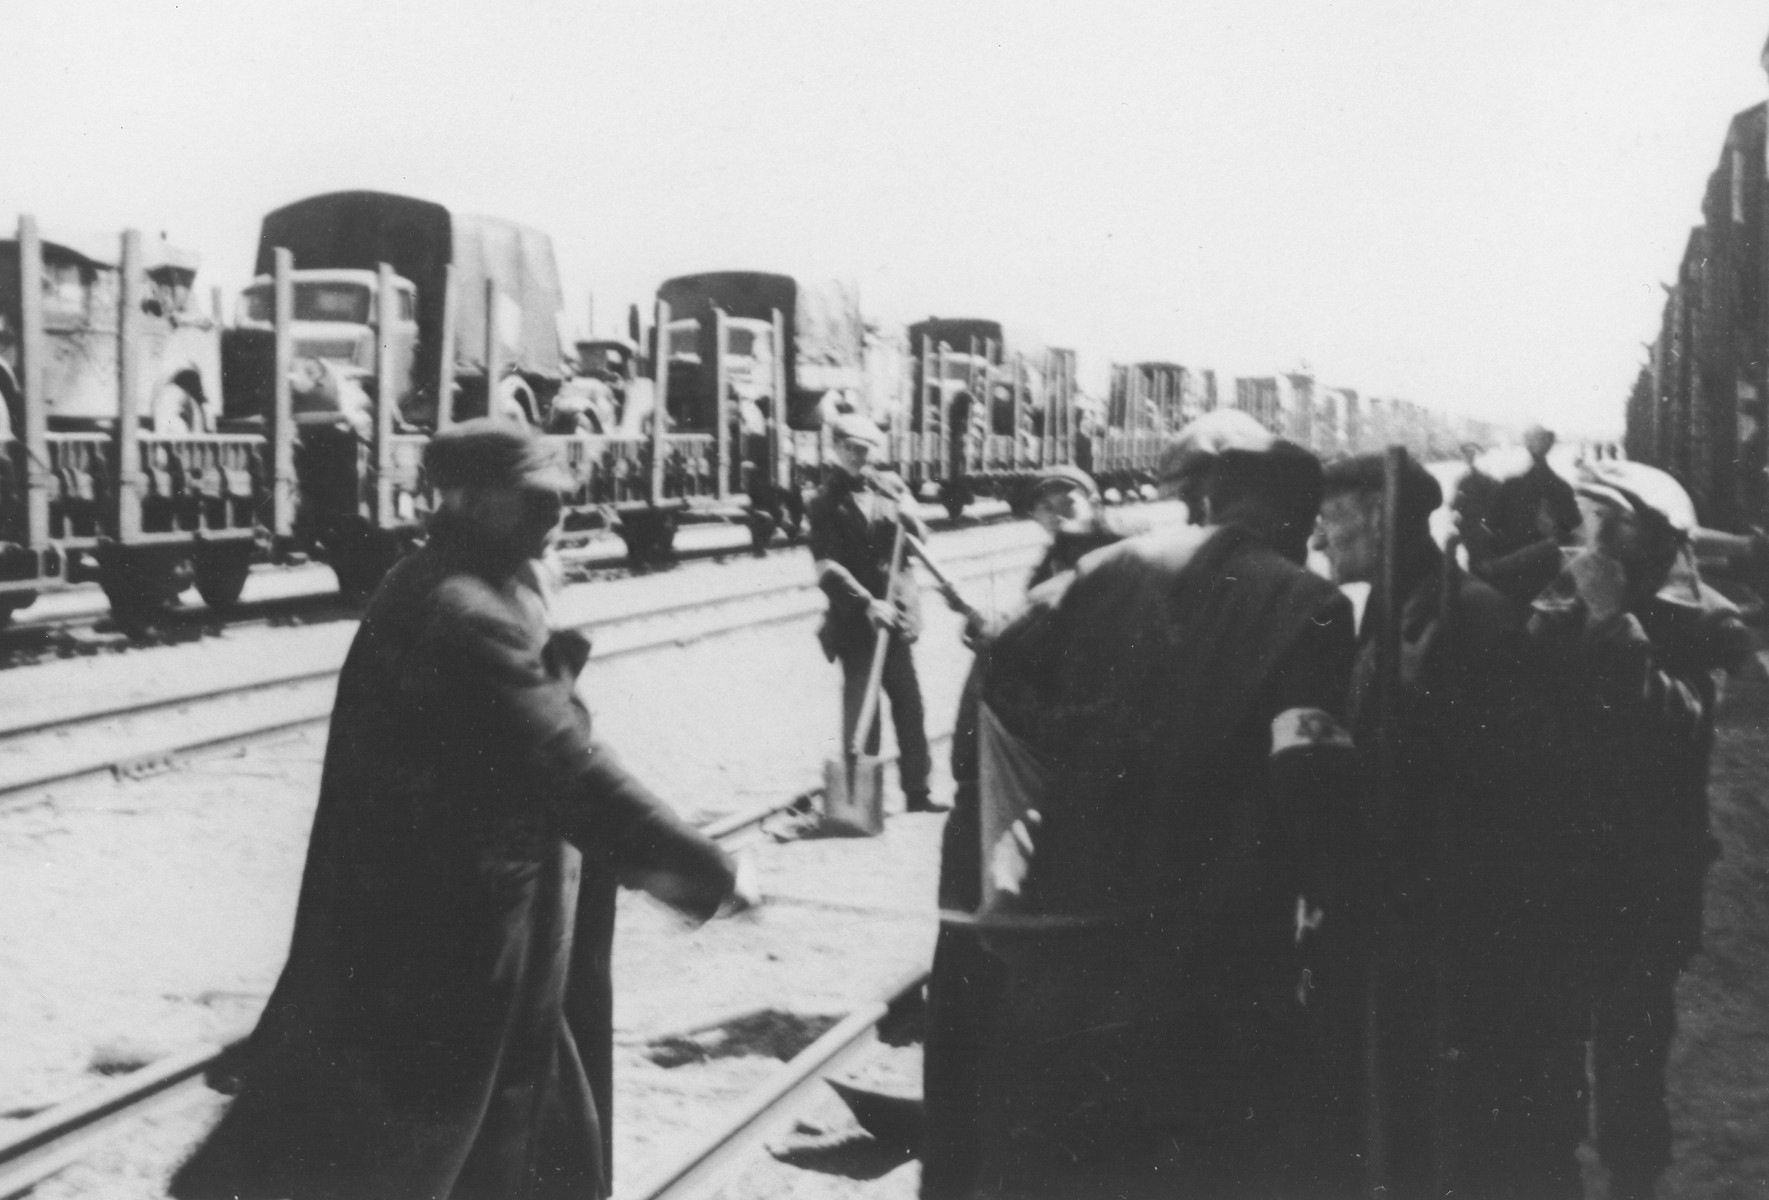 A group of Jewish men wearing armbands works at a railyard in Poland.

In the background is a long train carrying trucks.